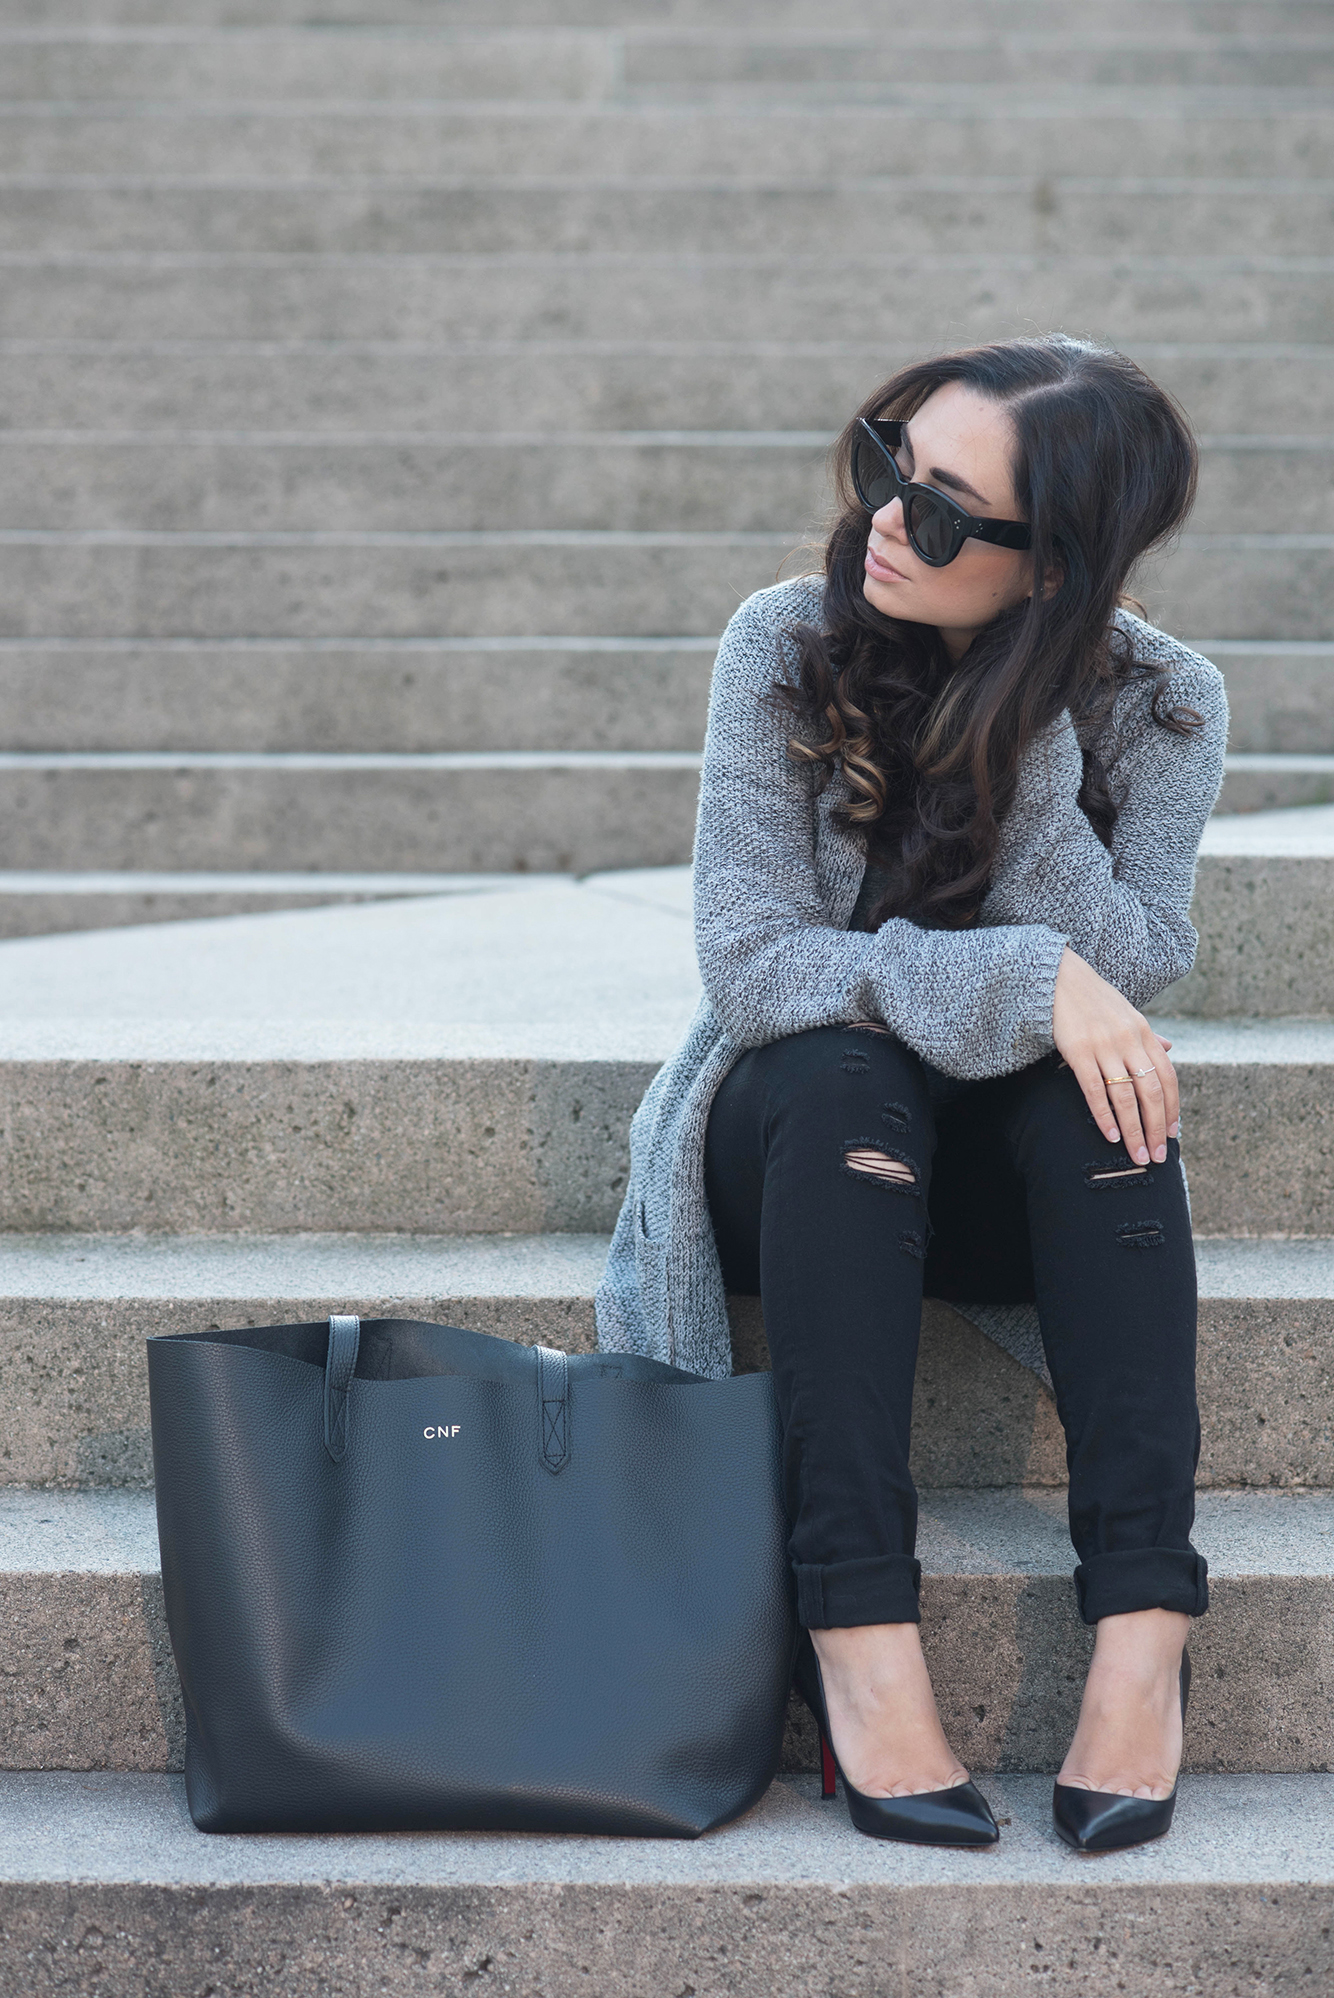 coco-and-vera-best-vancouver-fashion-blog-best-canadian-fashion-blog-top-street-style-sezane-cardigan-bdg-tee-mavi-jeans-christian-louboutin-pigalle-pumps-celine-audrey-sunglasses-cuyana-tote